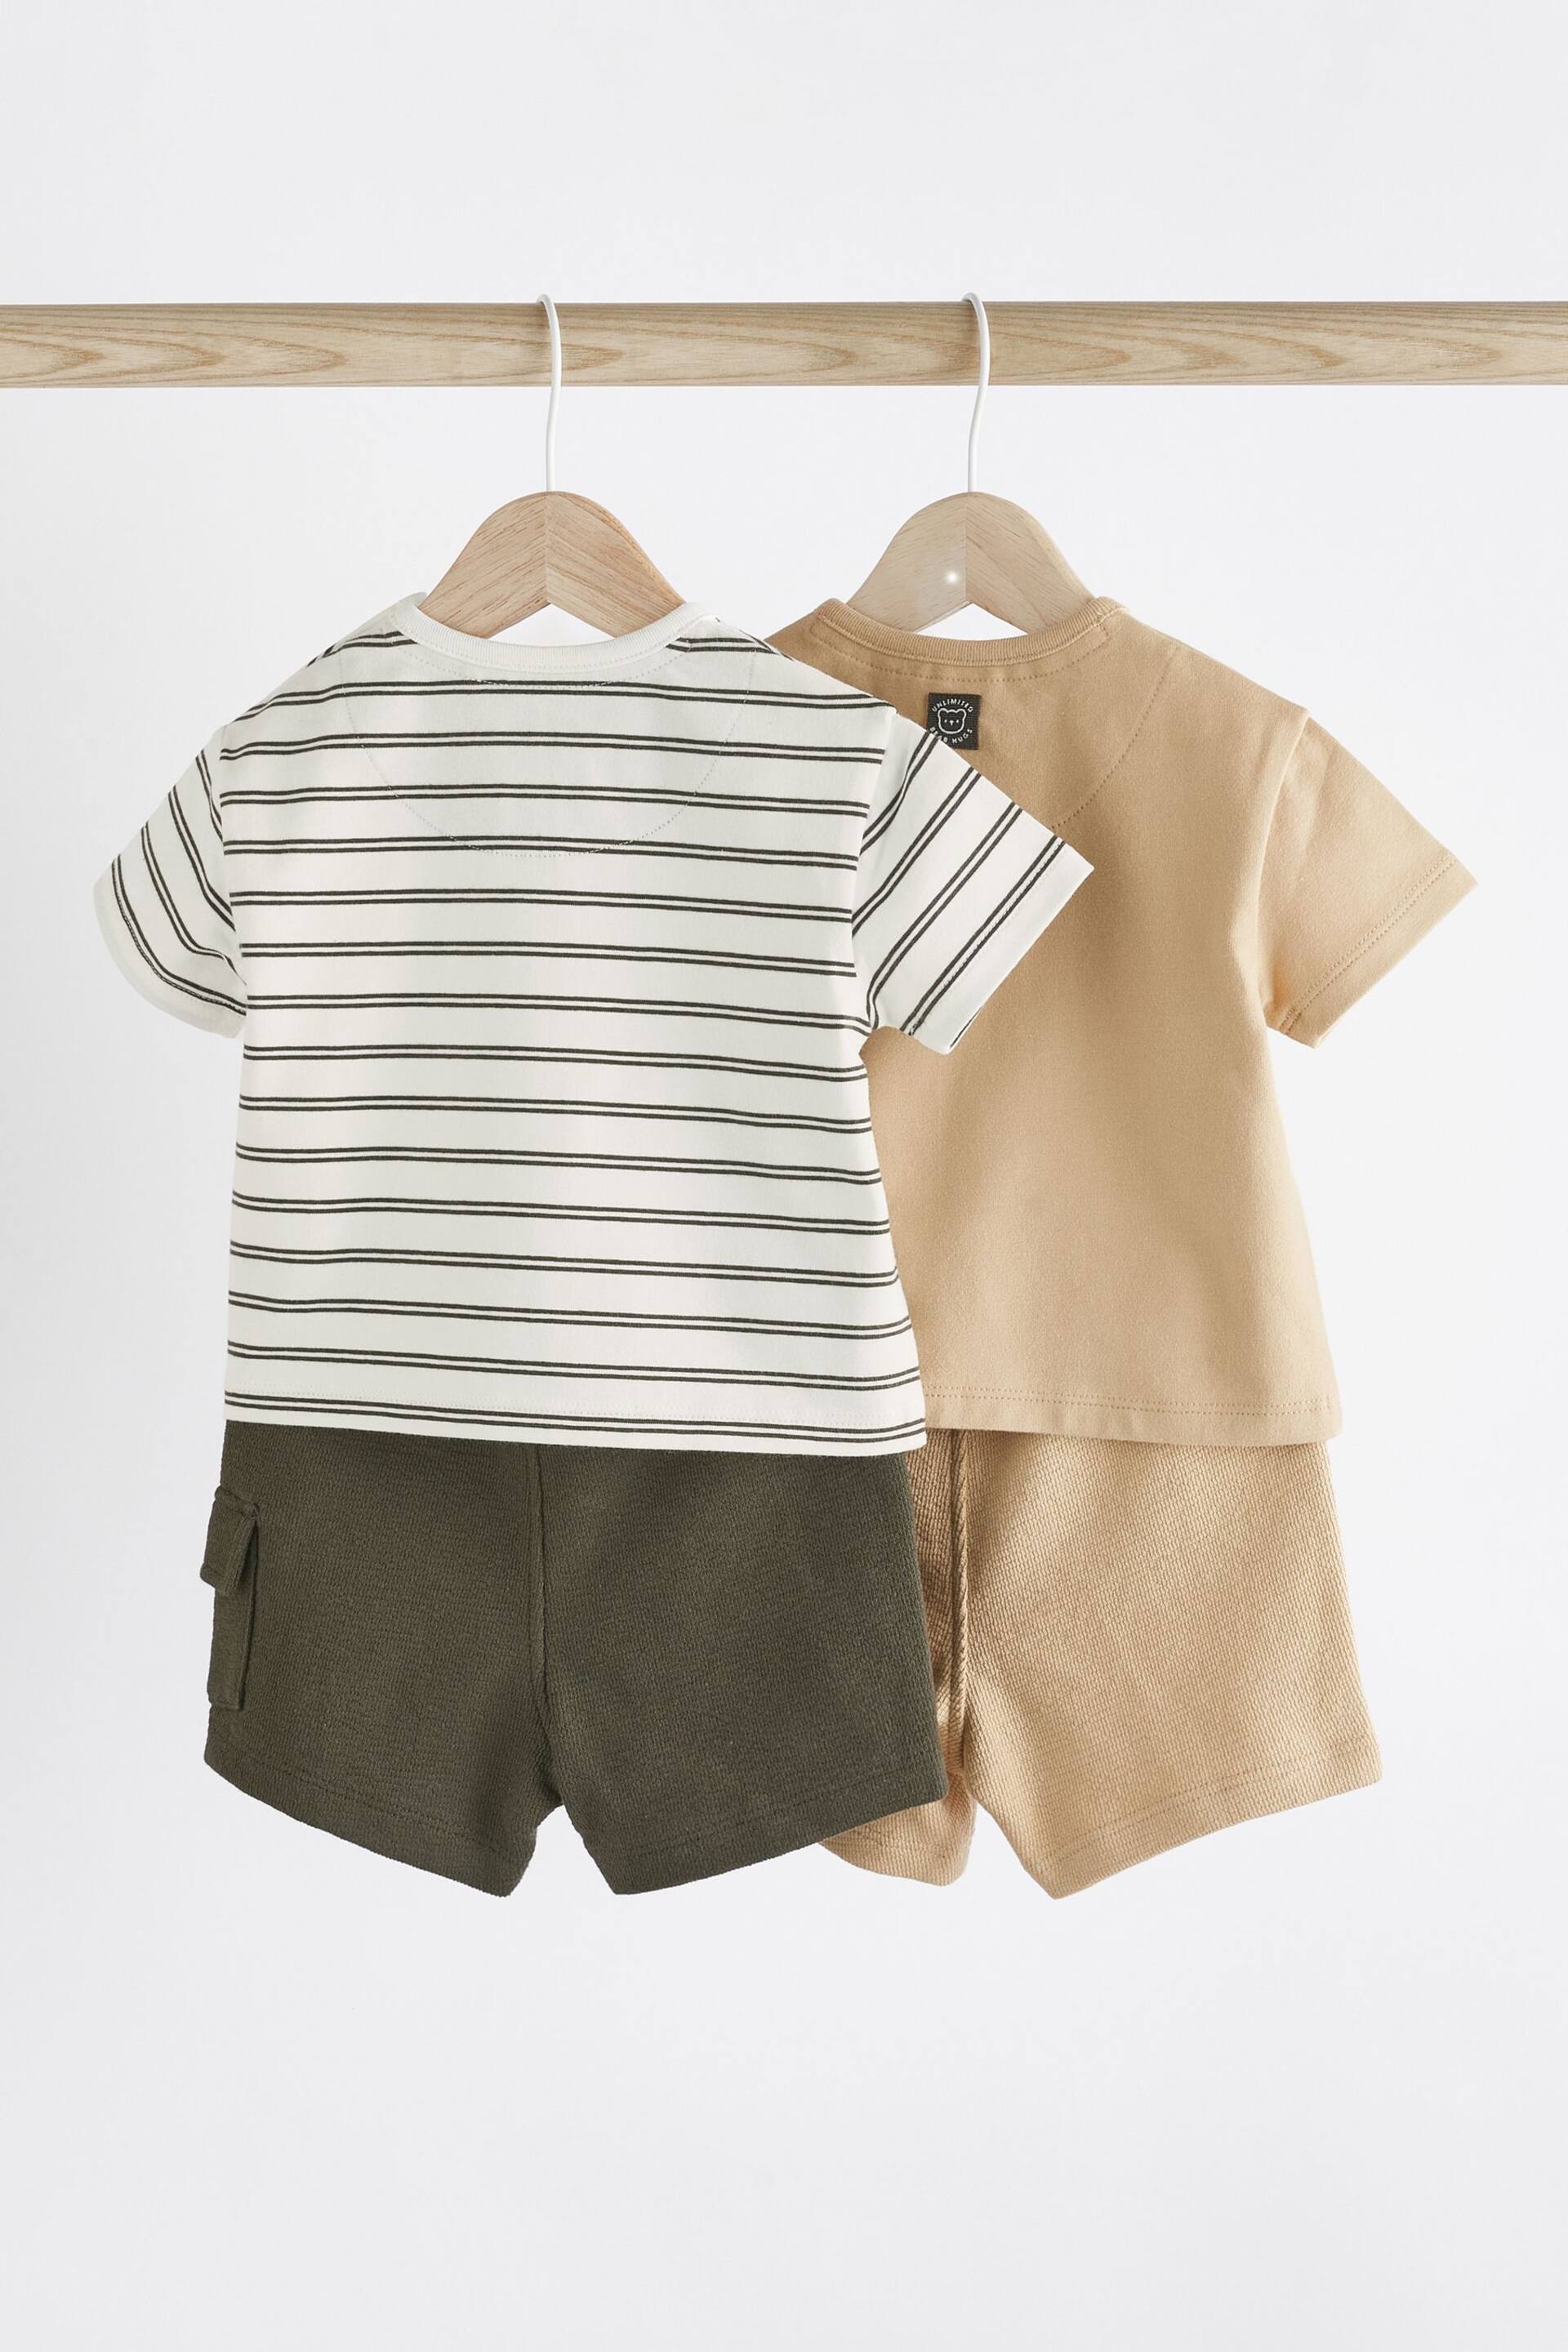 Monochrome Baby T-Shirts And Shorts Set 2 Pack - Image 2 of 10